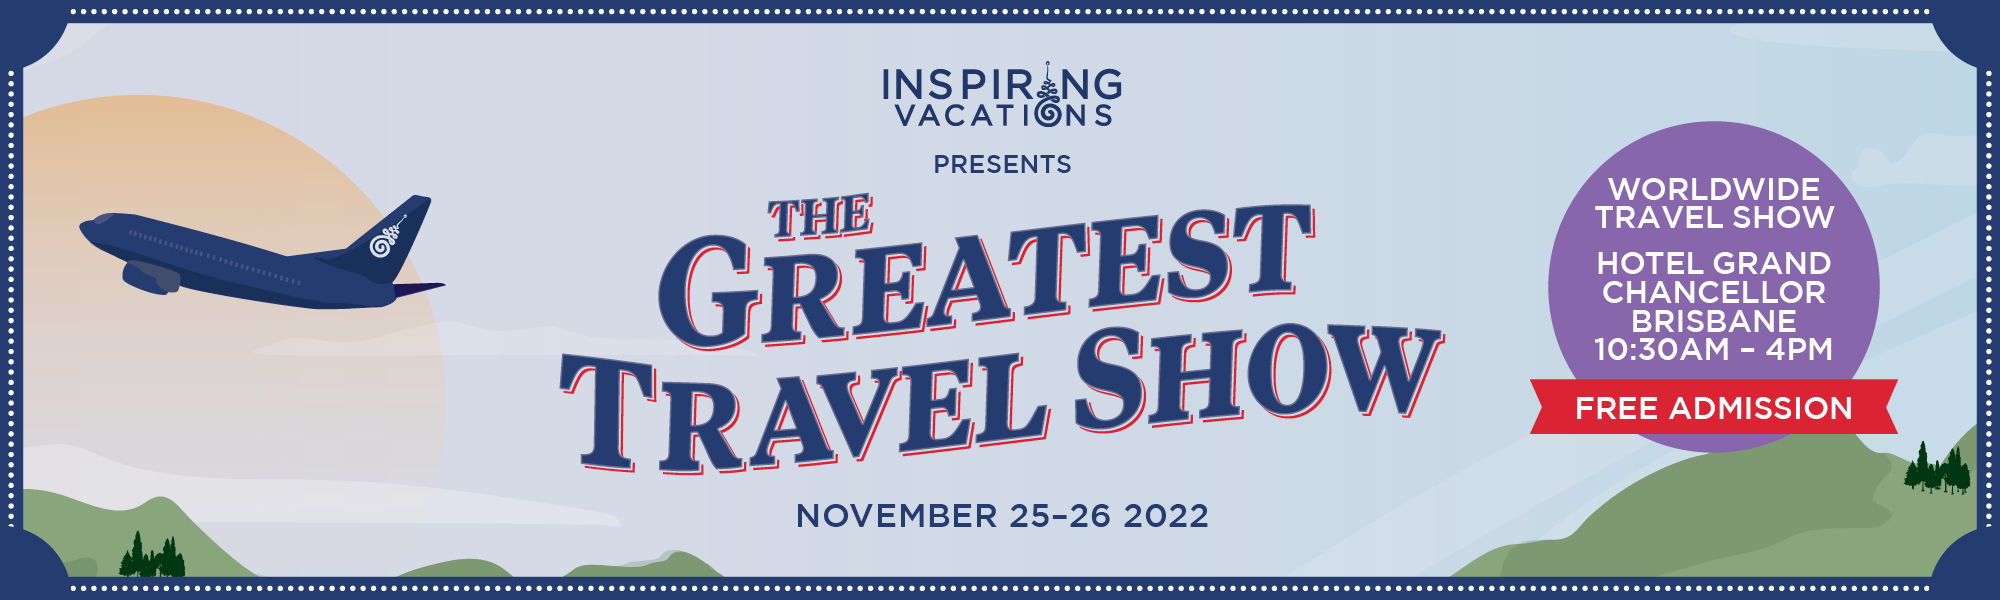 The Greatest Travel Show